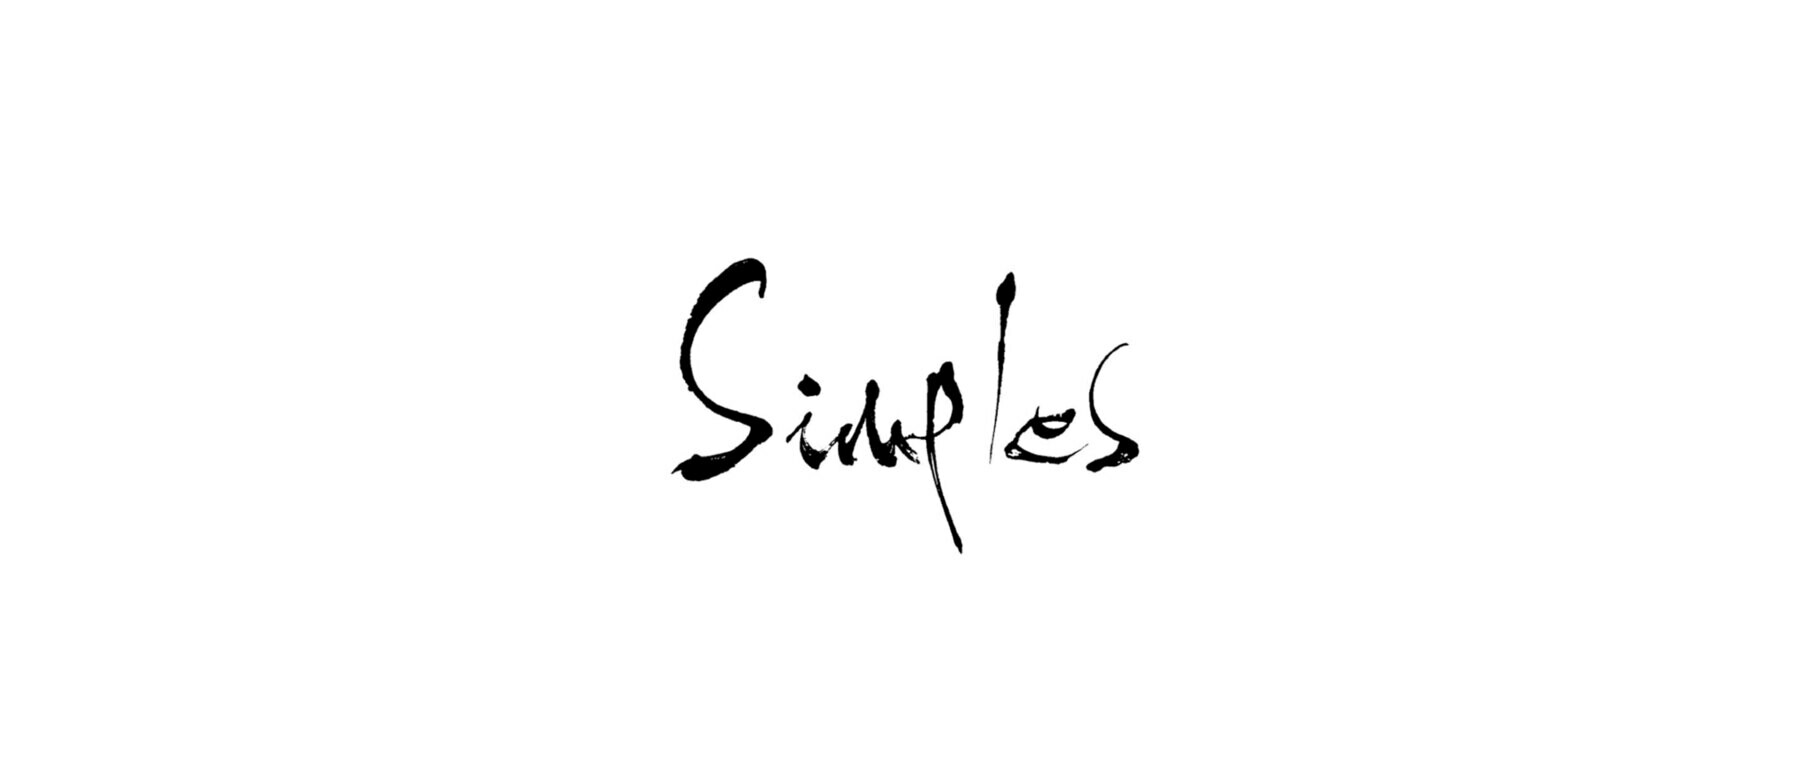 Simples's images1